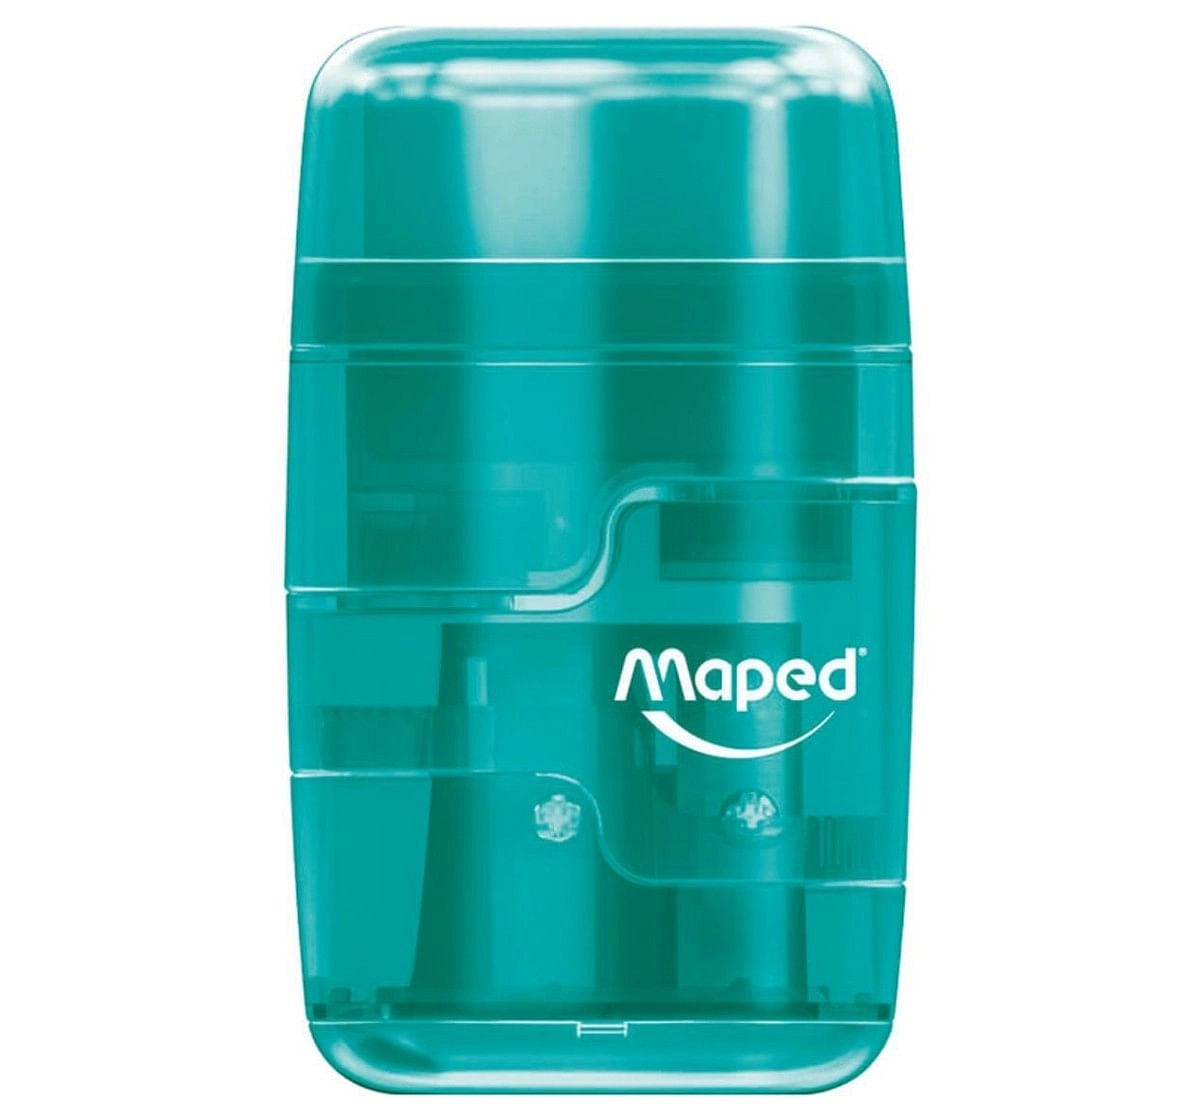 Maped Connect 2 Holes Basic With Eraser, 7Y+ (Blue)